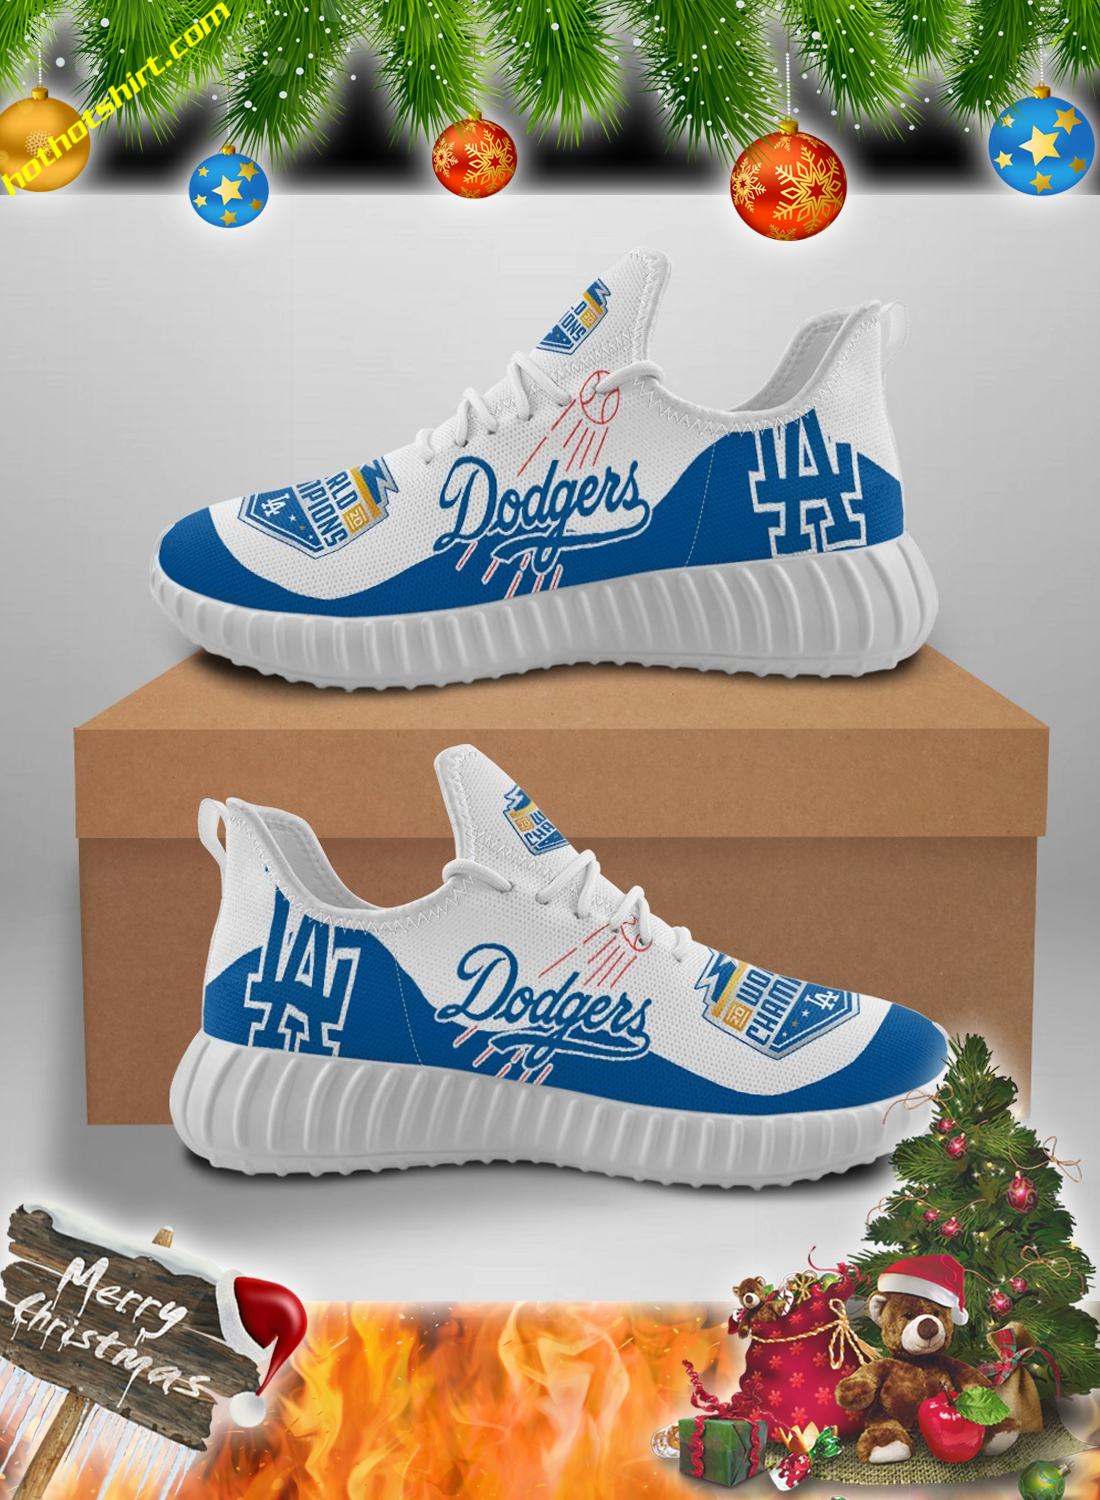 Los angeles dodgers 2020 world series champions sneaker